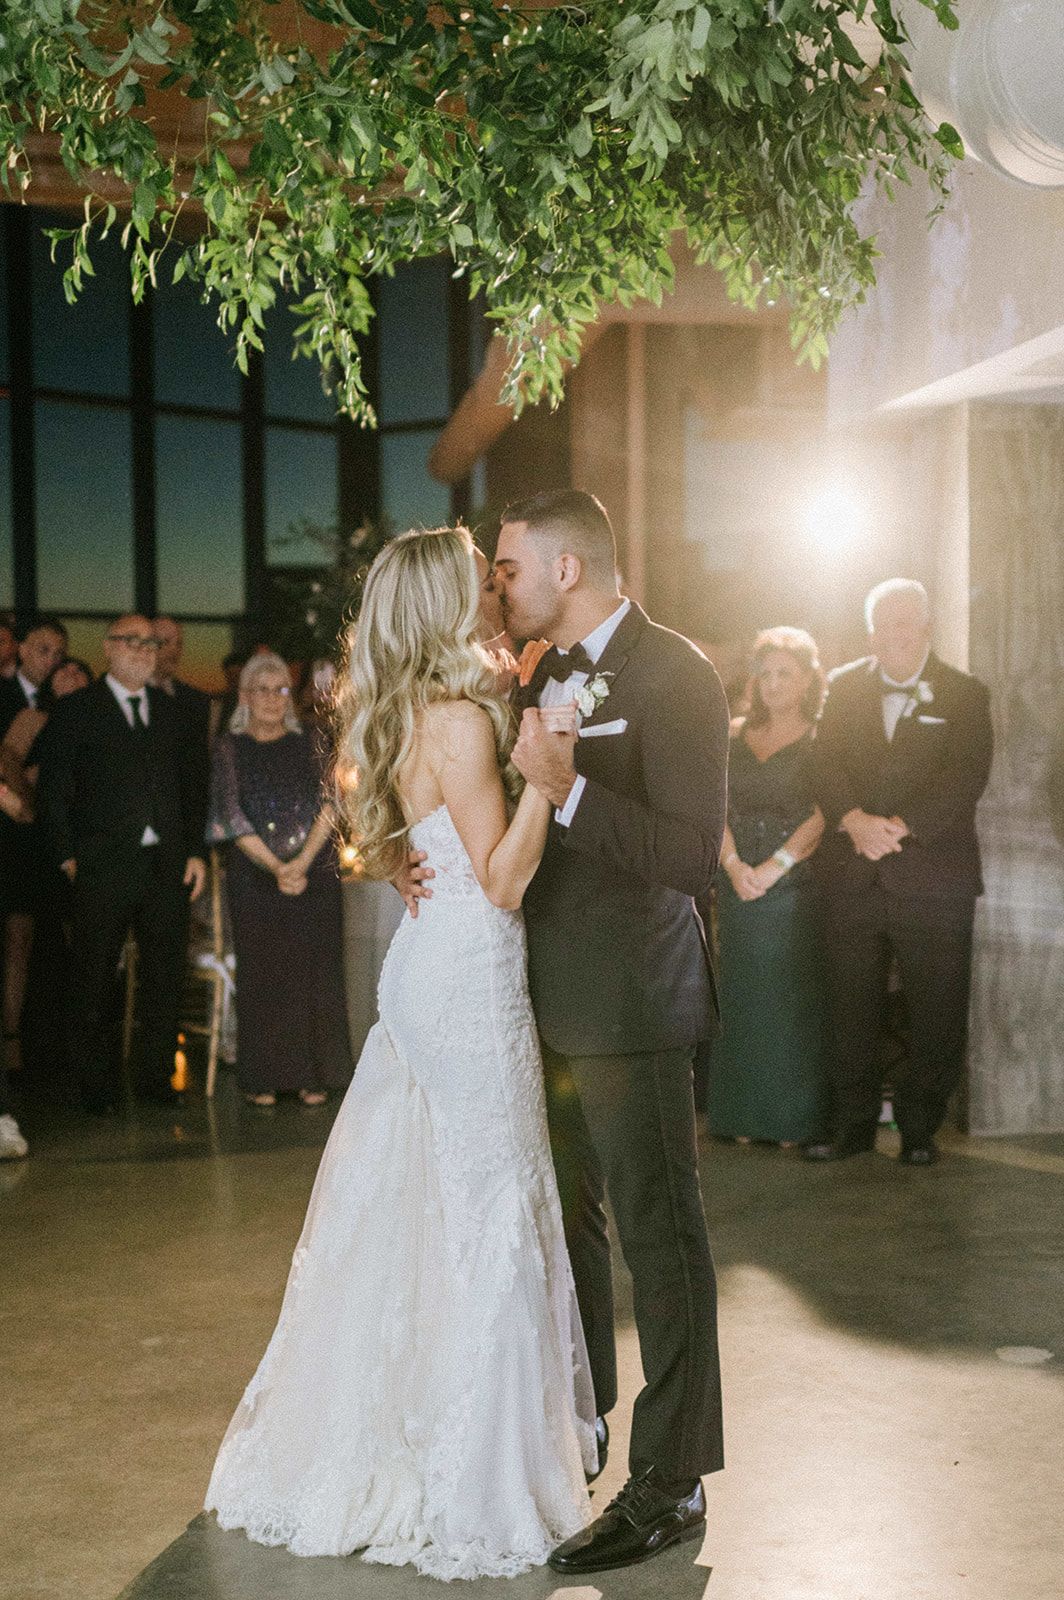 Couple shares first dance at Wave Resort